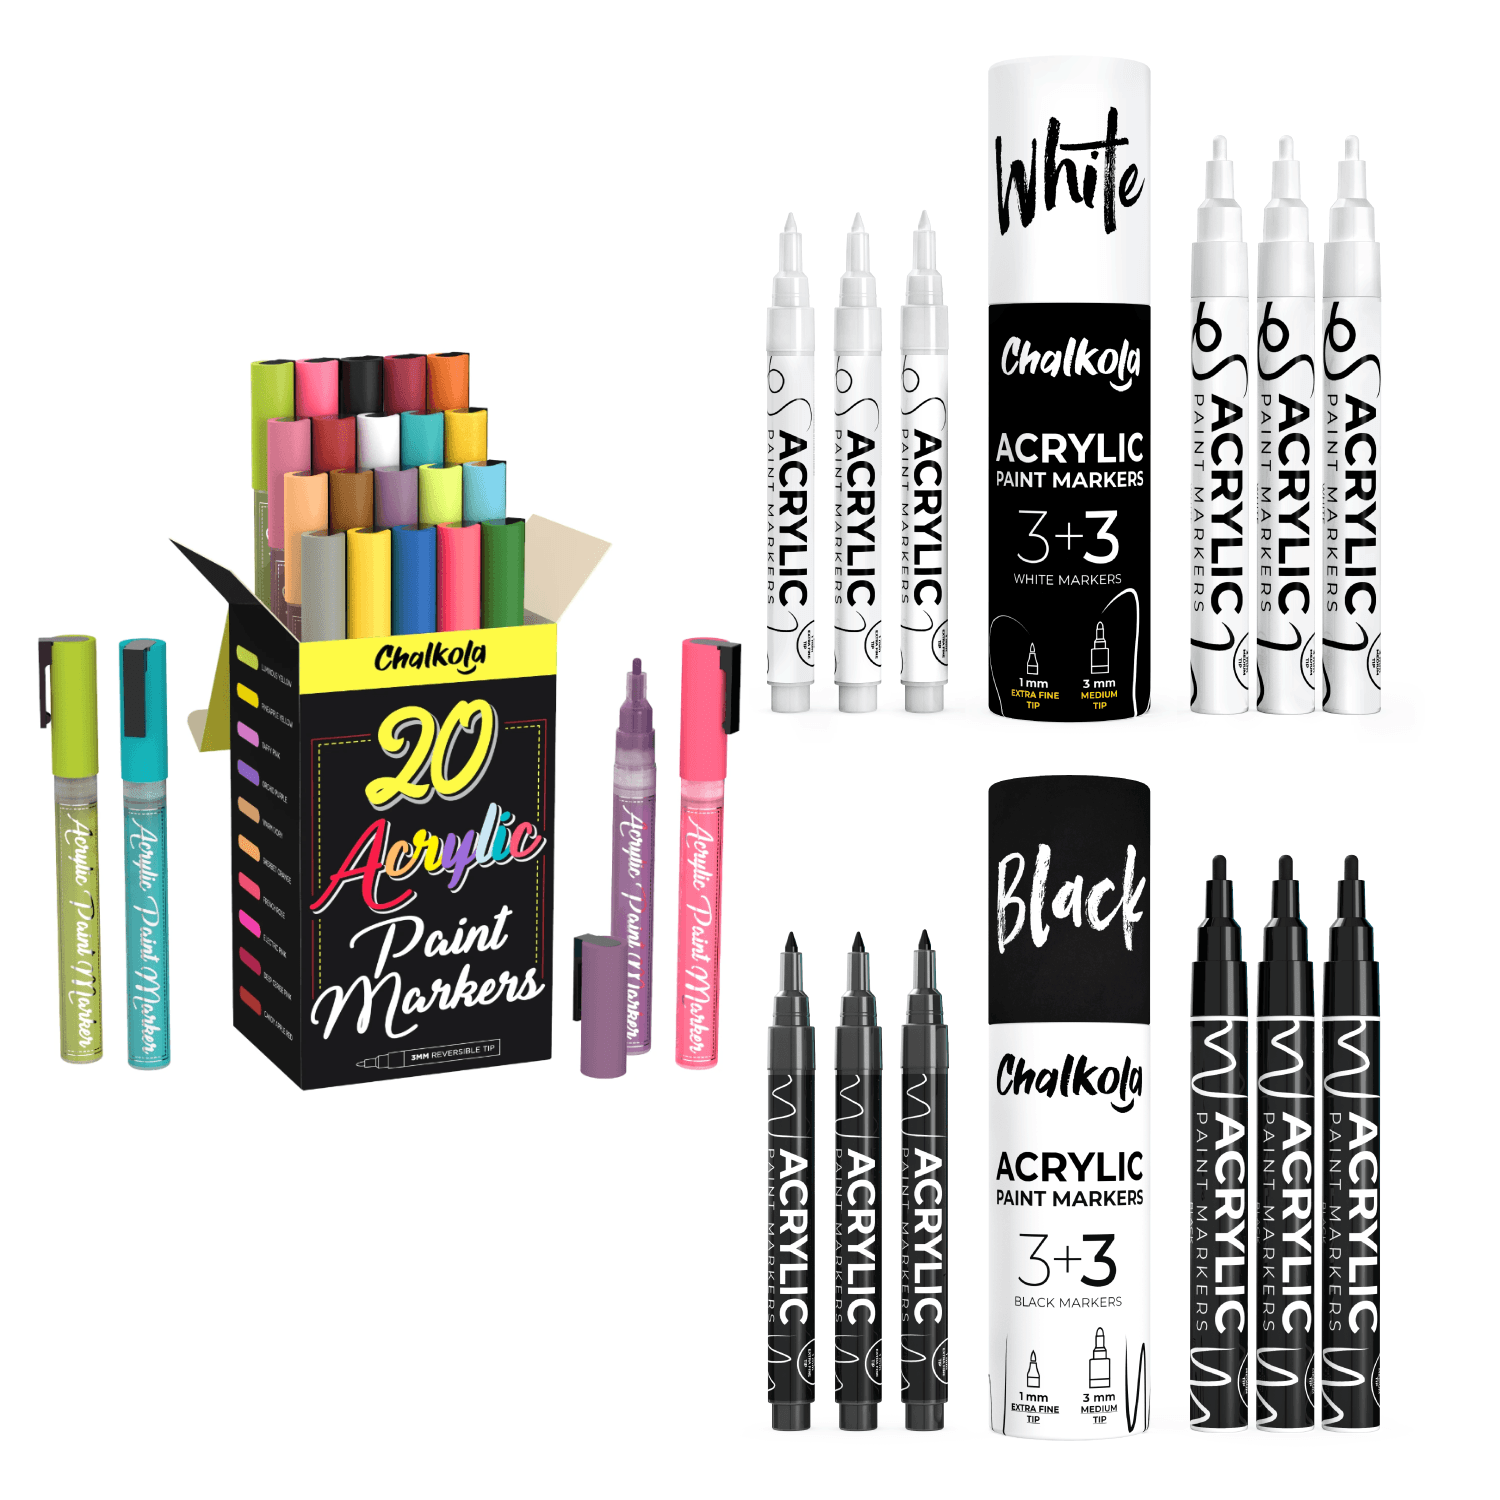 Black Acrylic Paint Marker Pens - Pack of 6, Extra Fine and Medium Tip